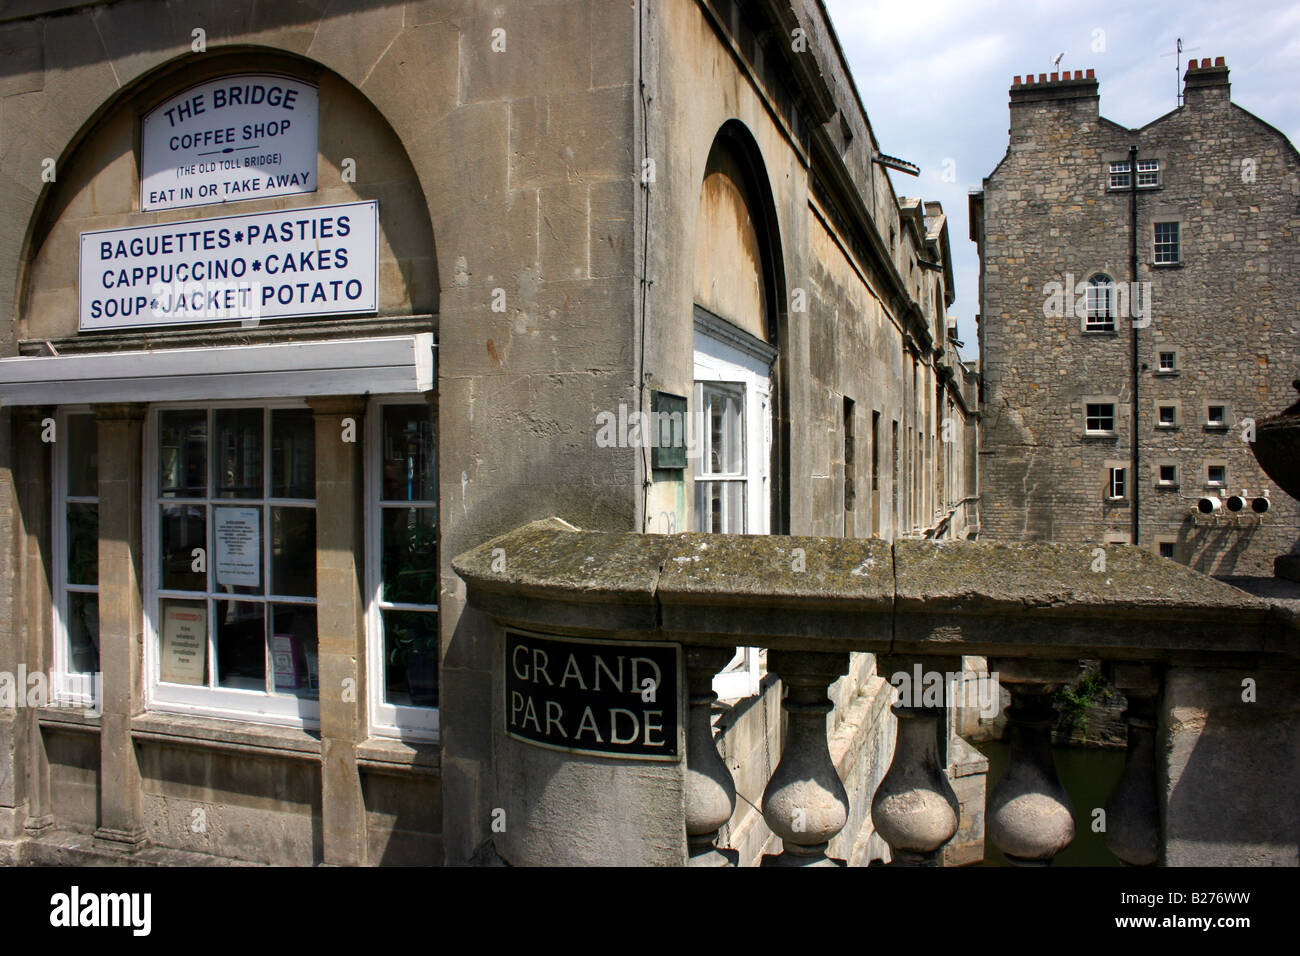 [Pulteney Bridge] at the Grand Parade in City of Bath, Somerset, England Stock Photo